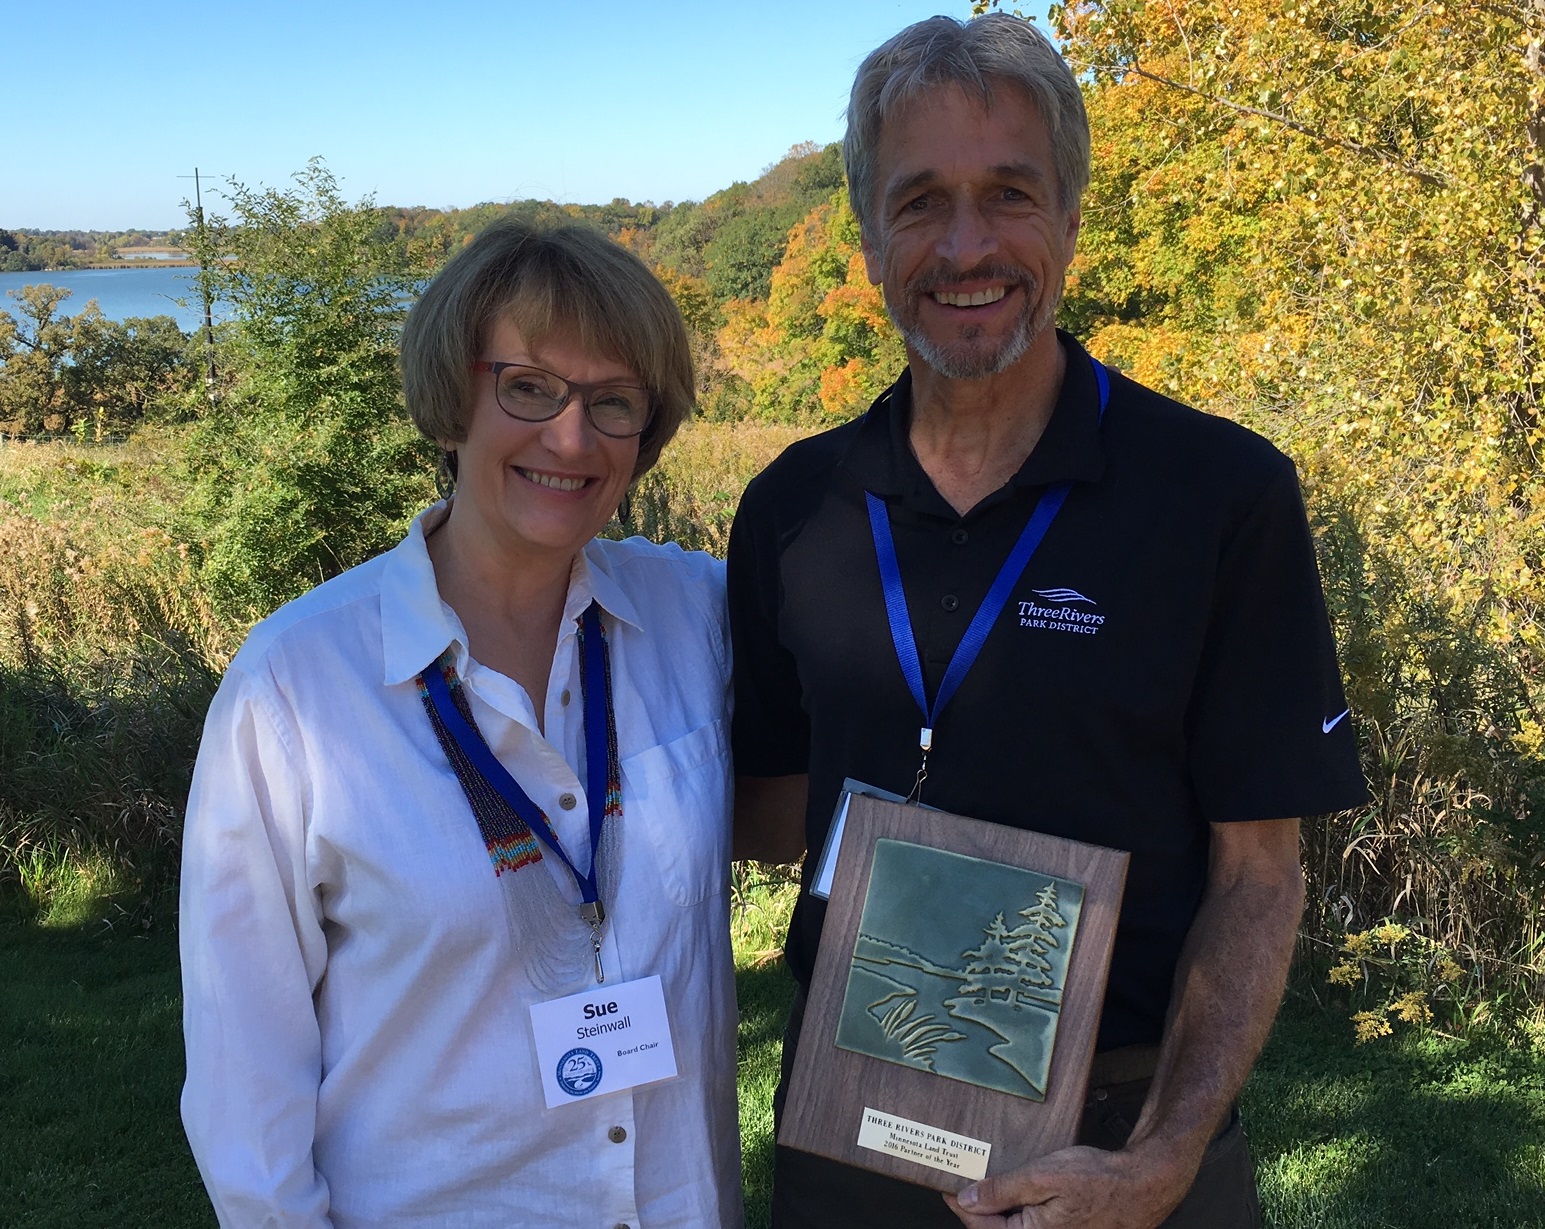 Sue Steinwall, Land Trust Board Chair with Tom Dowell, Associate Superintendent of the Three Rivers Park District, Partner of the Year